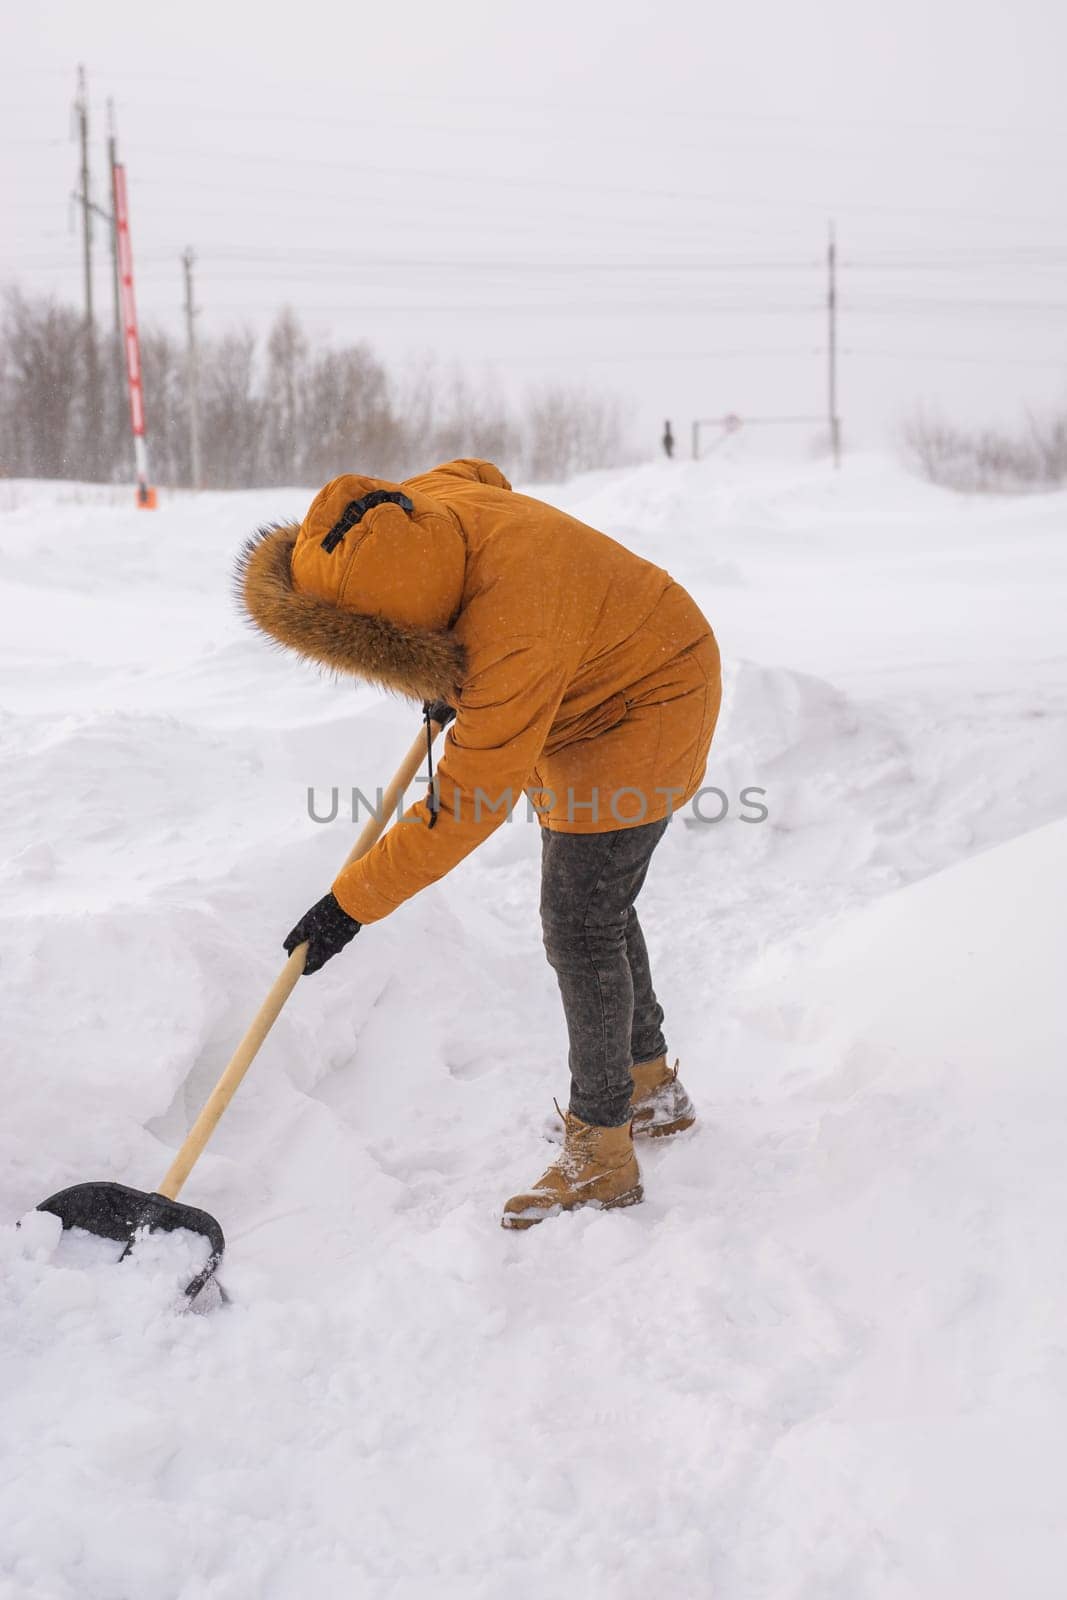 Man cleaning snow from sidewalk and using snow shovel. Winter season.